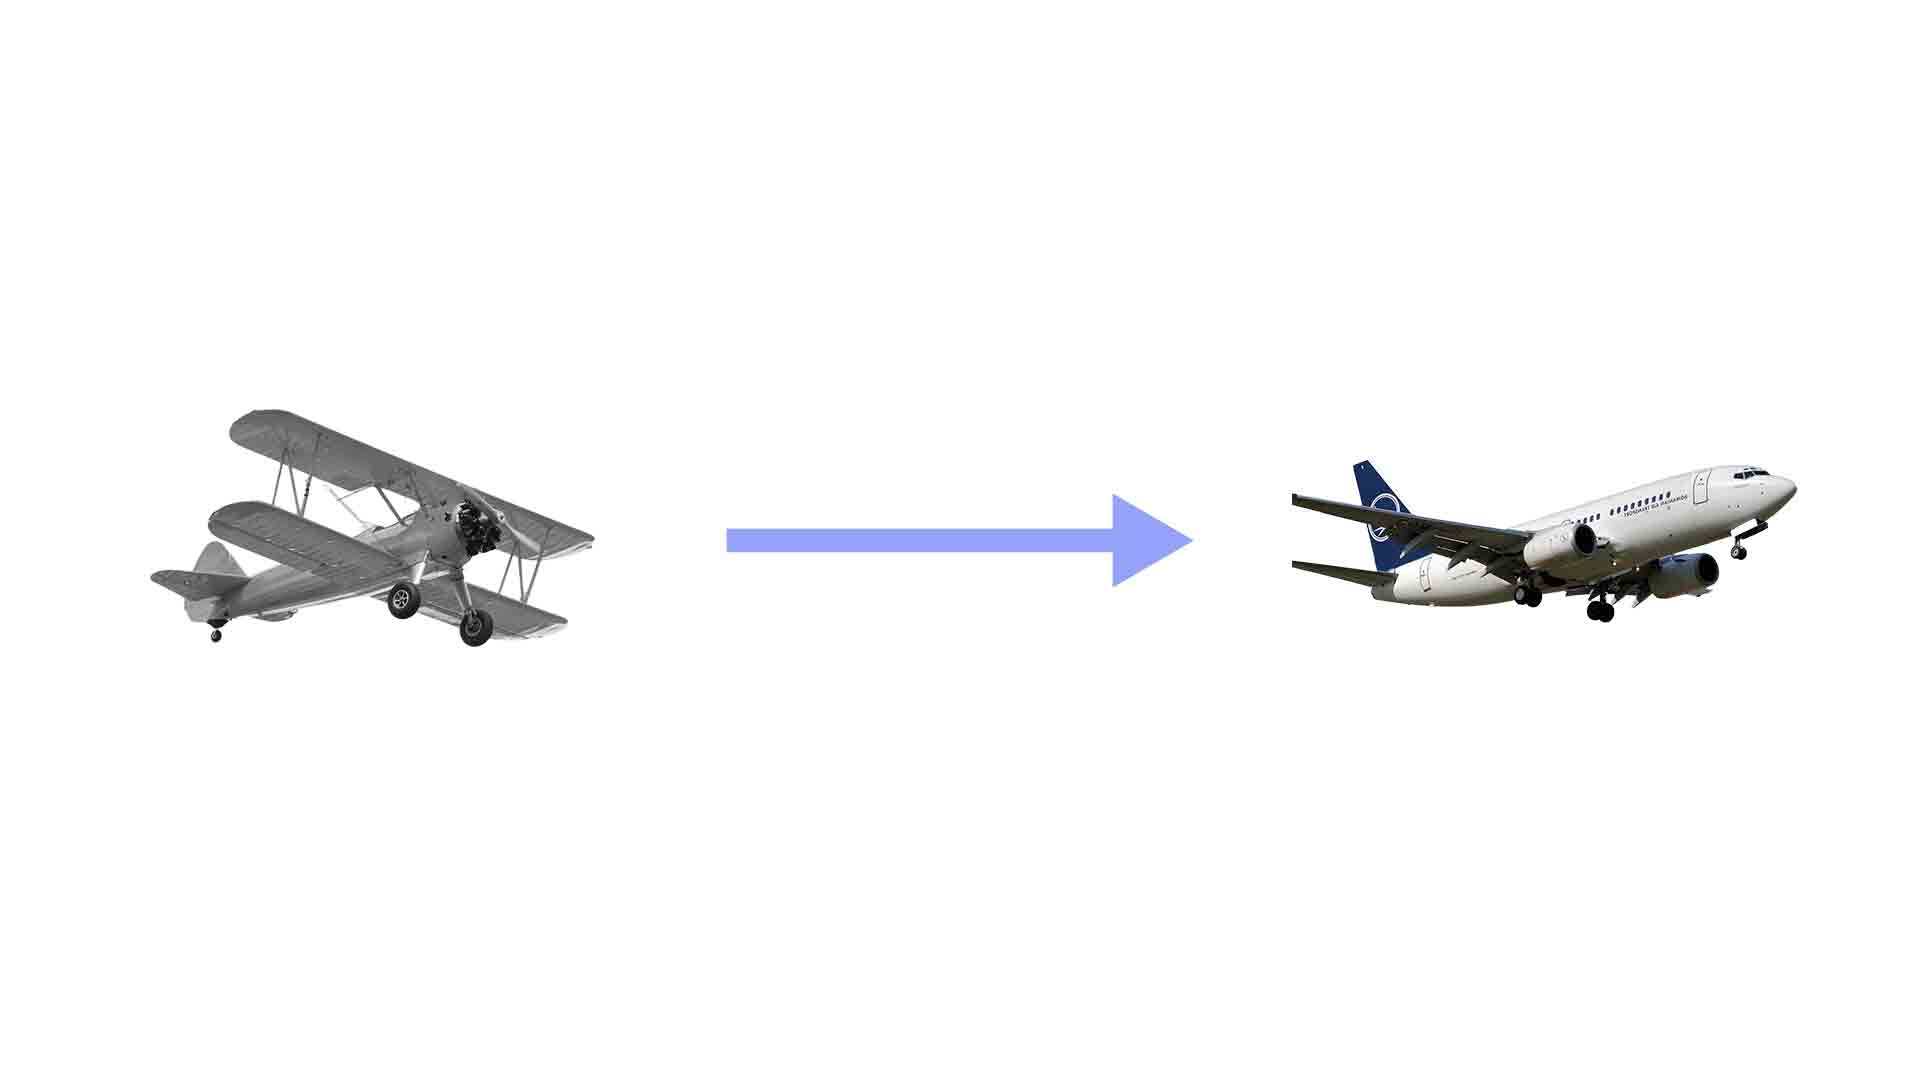 Planes have evolved with the help of adhesives and bonding